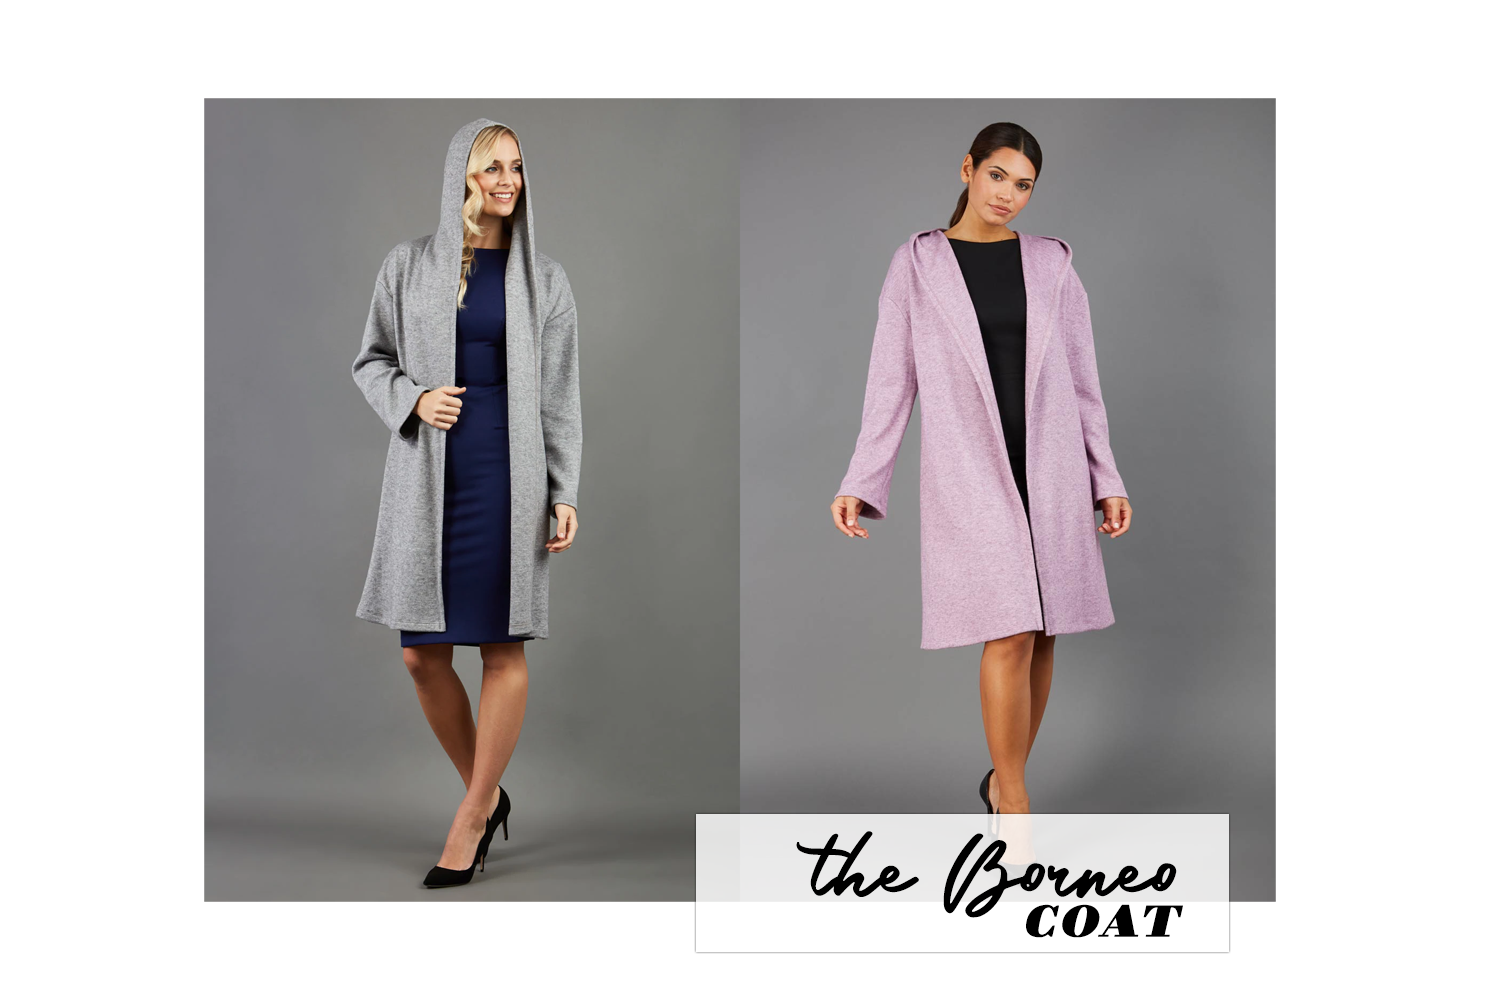 two images combined into one edit, of a model wearing the borneo coat in grey and lavender.